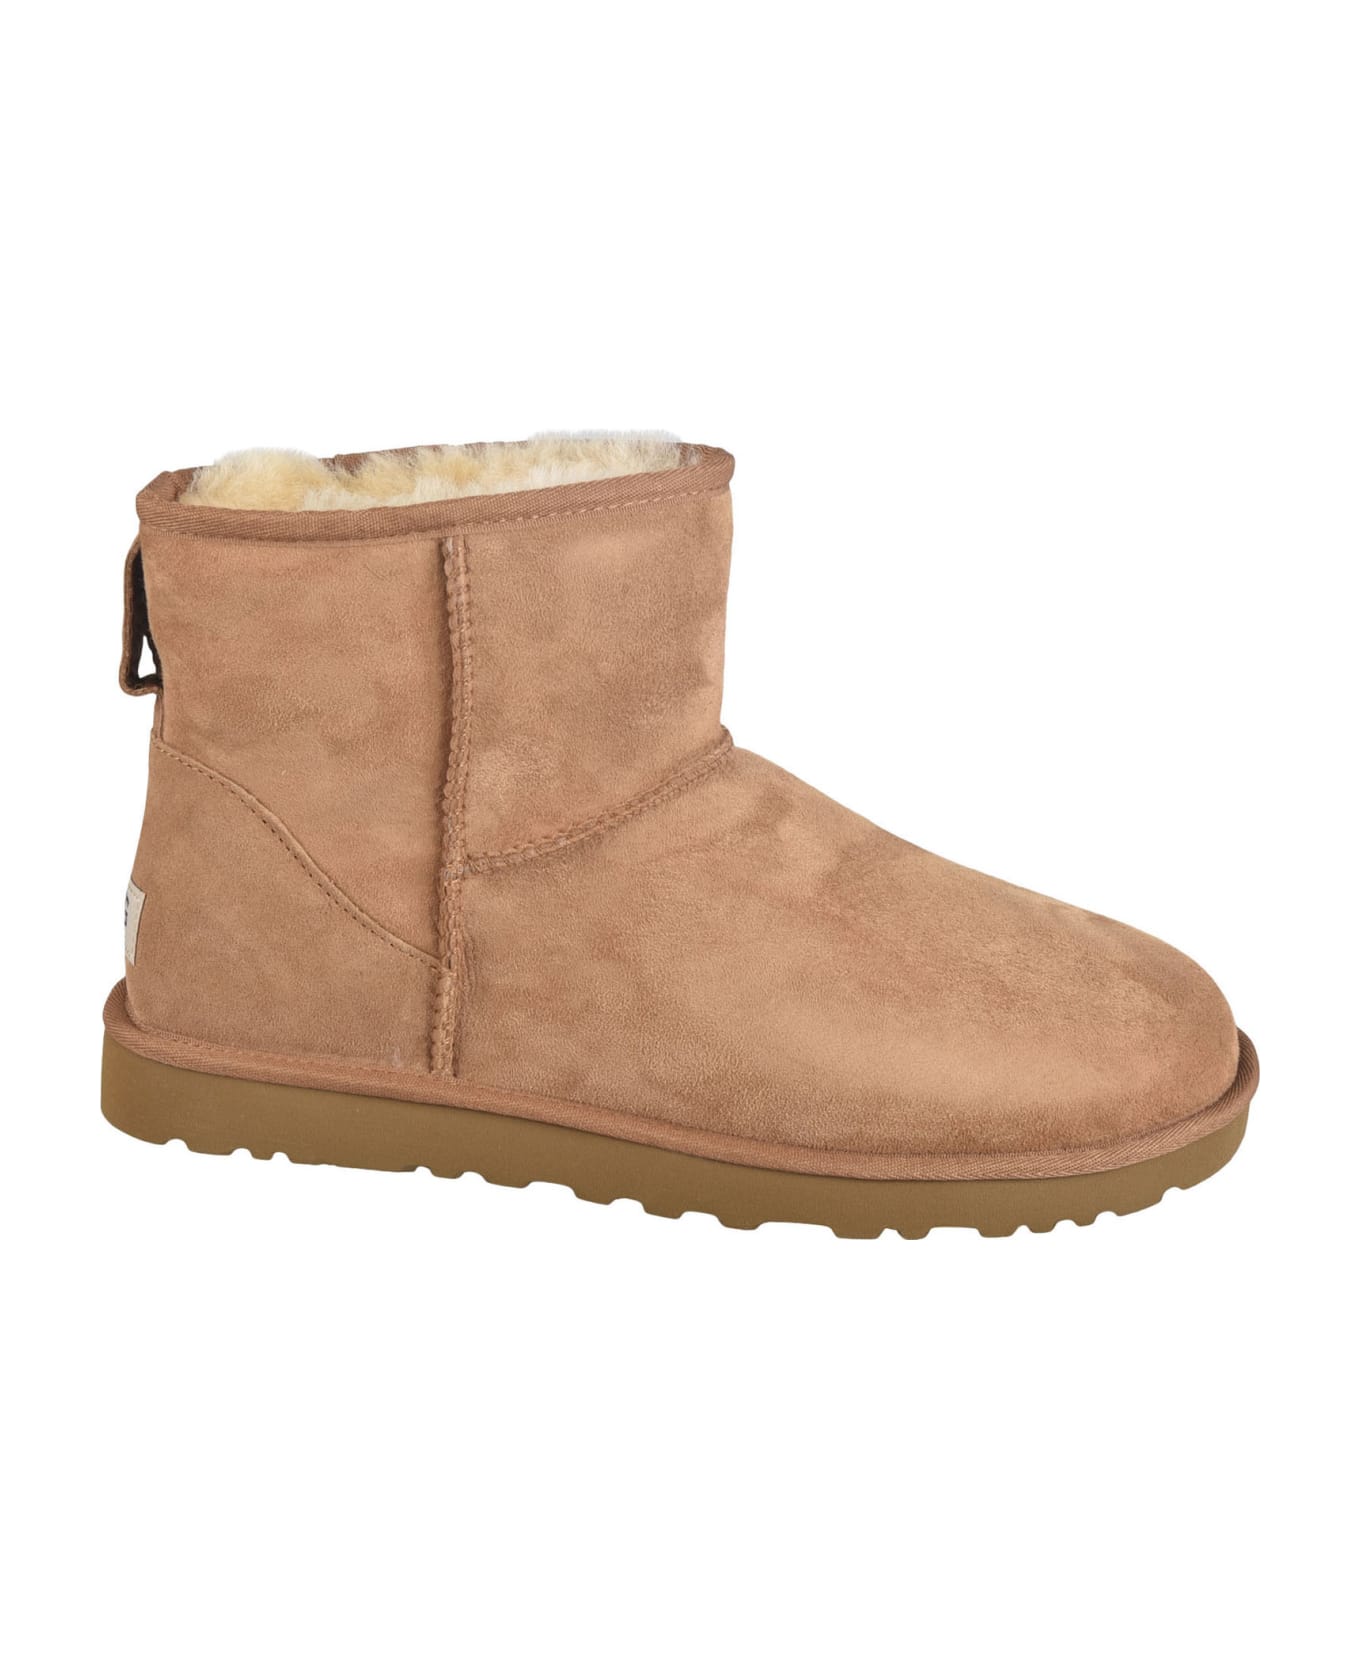 UGG Mini Classic Suede Ankle Boots - CHESTNUT